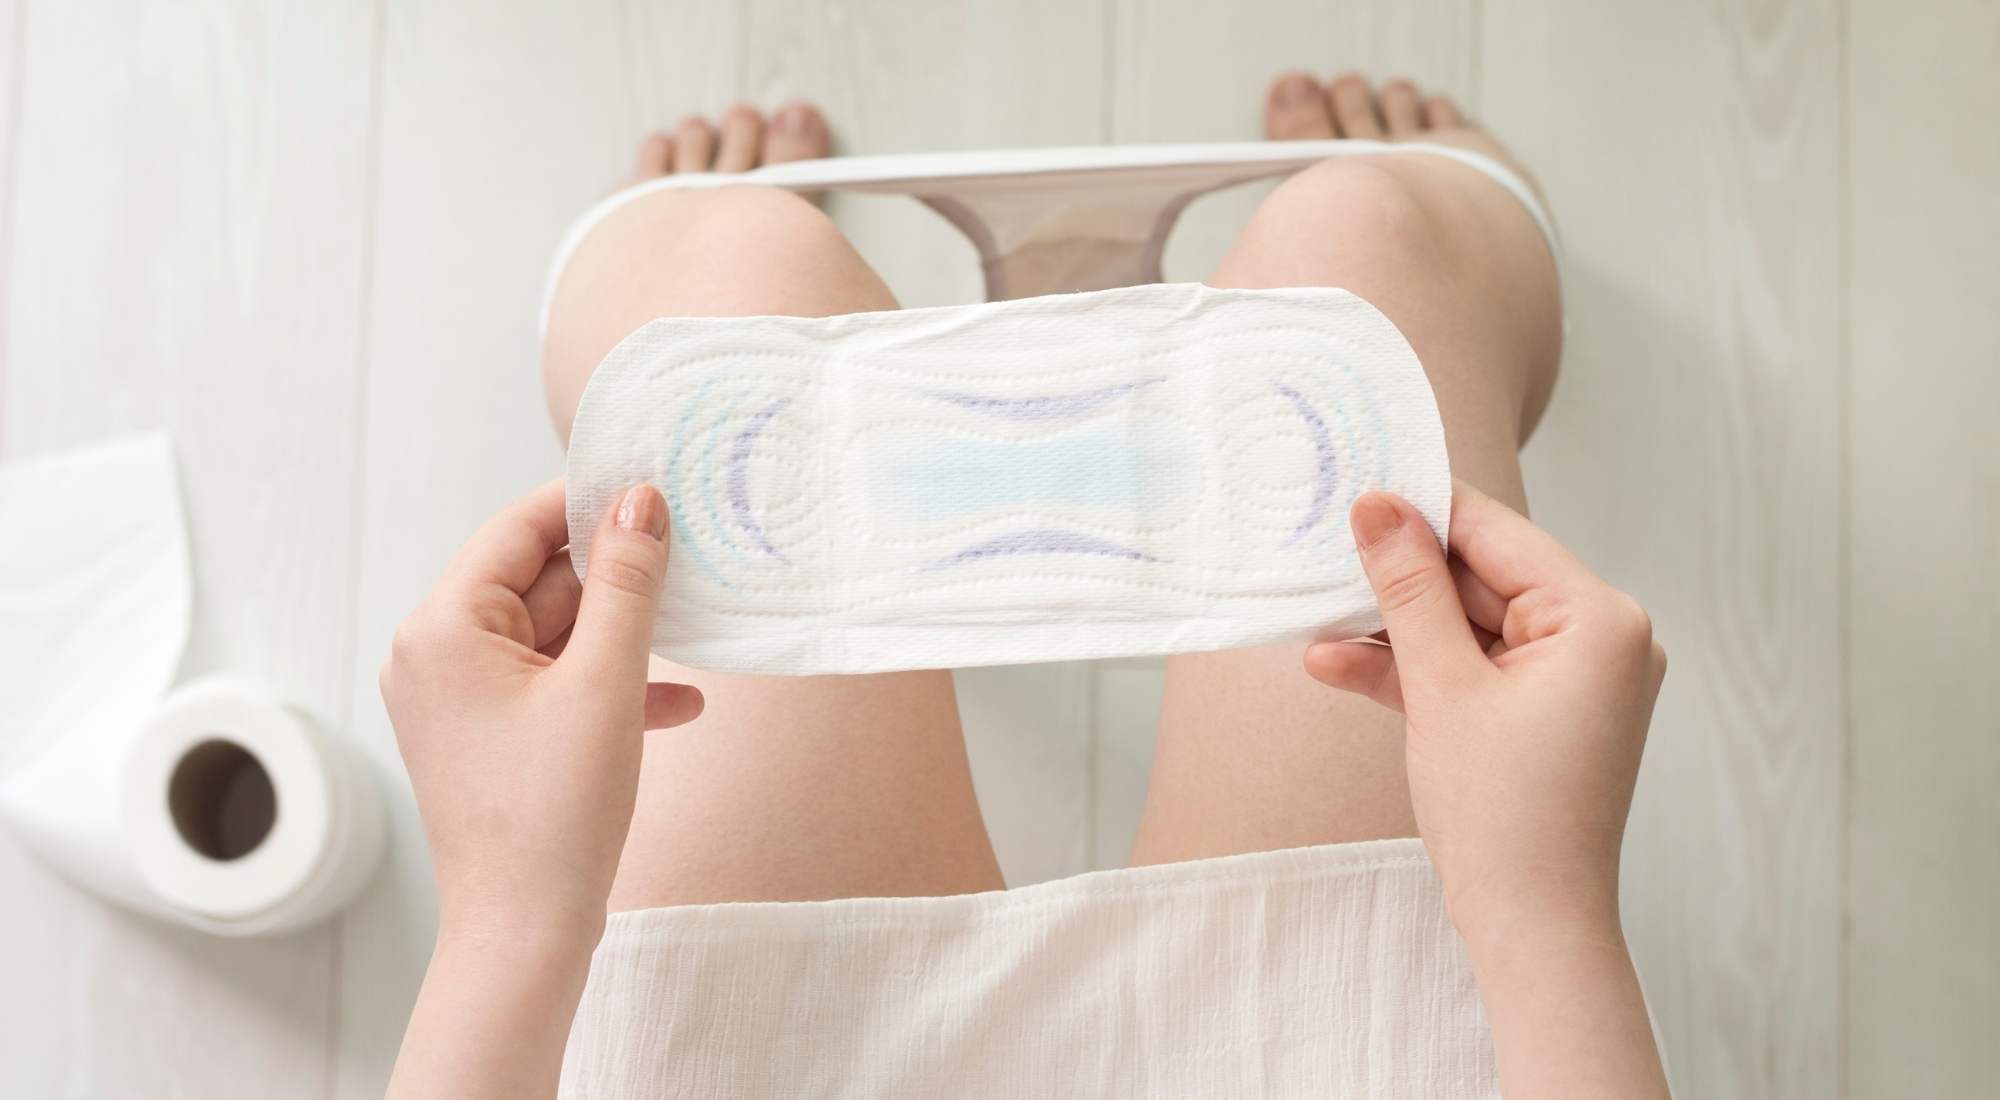 mems care Period Panty For Sanitary Protection Super Absorbent